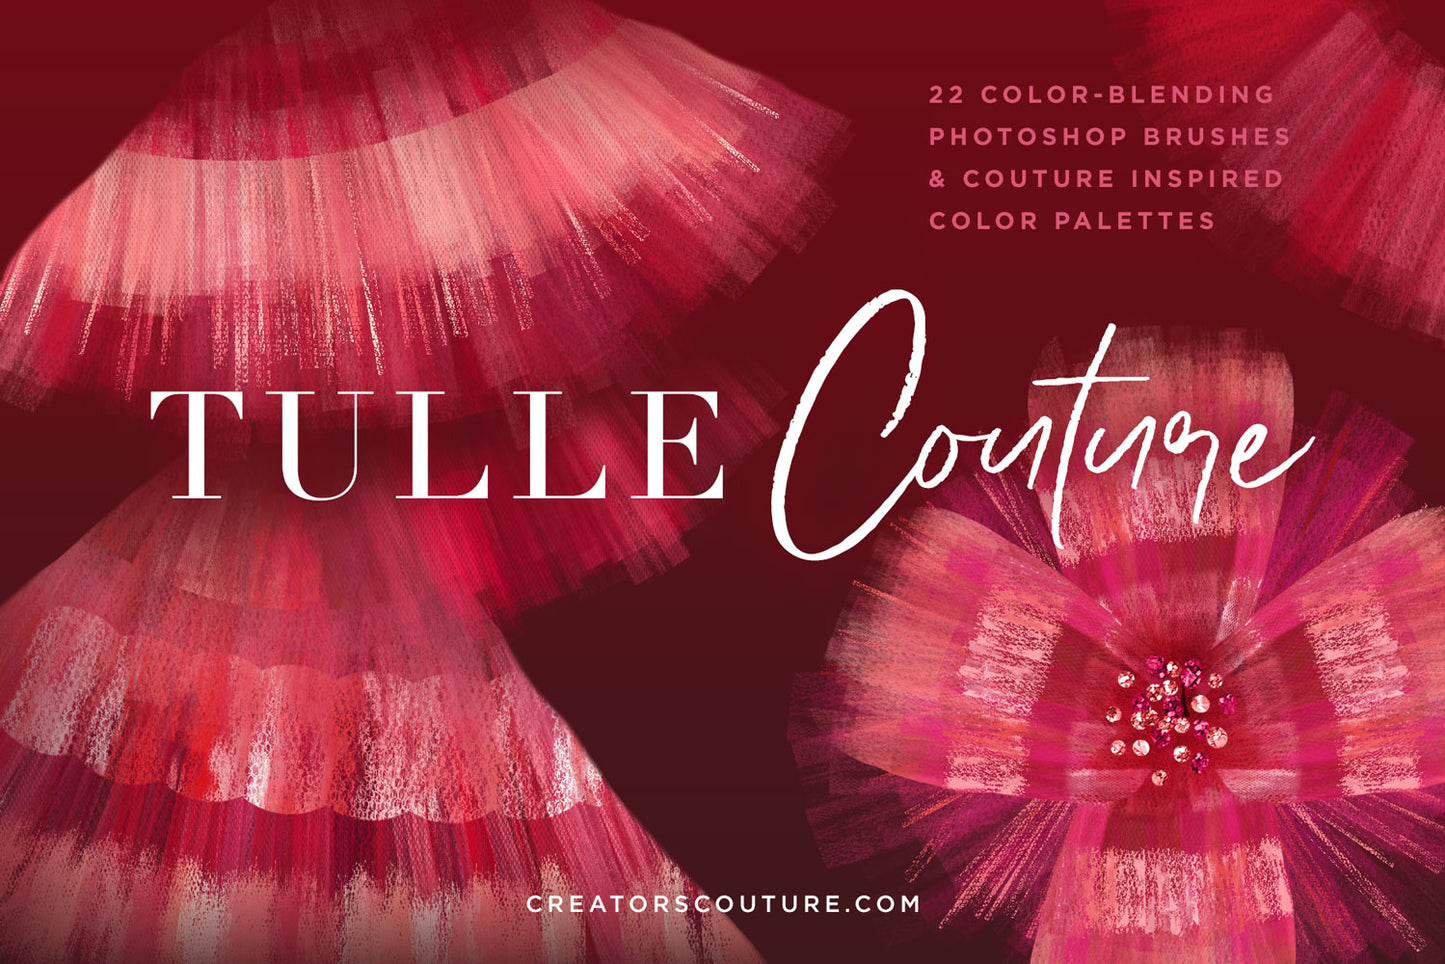 Tulle & Organza Multi-Color Photoshop Brushes: Runway Inspired Creative  Resources